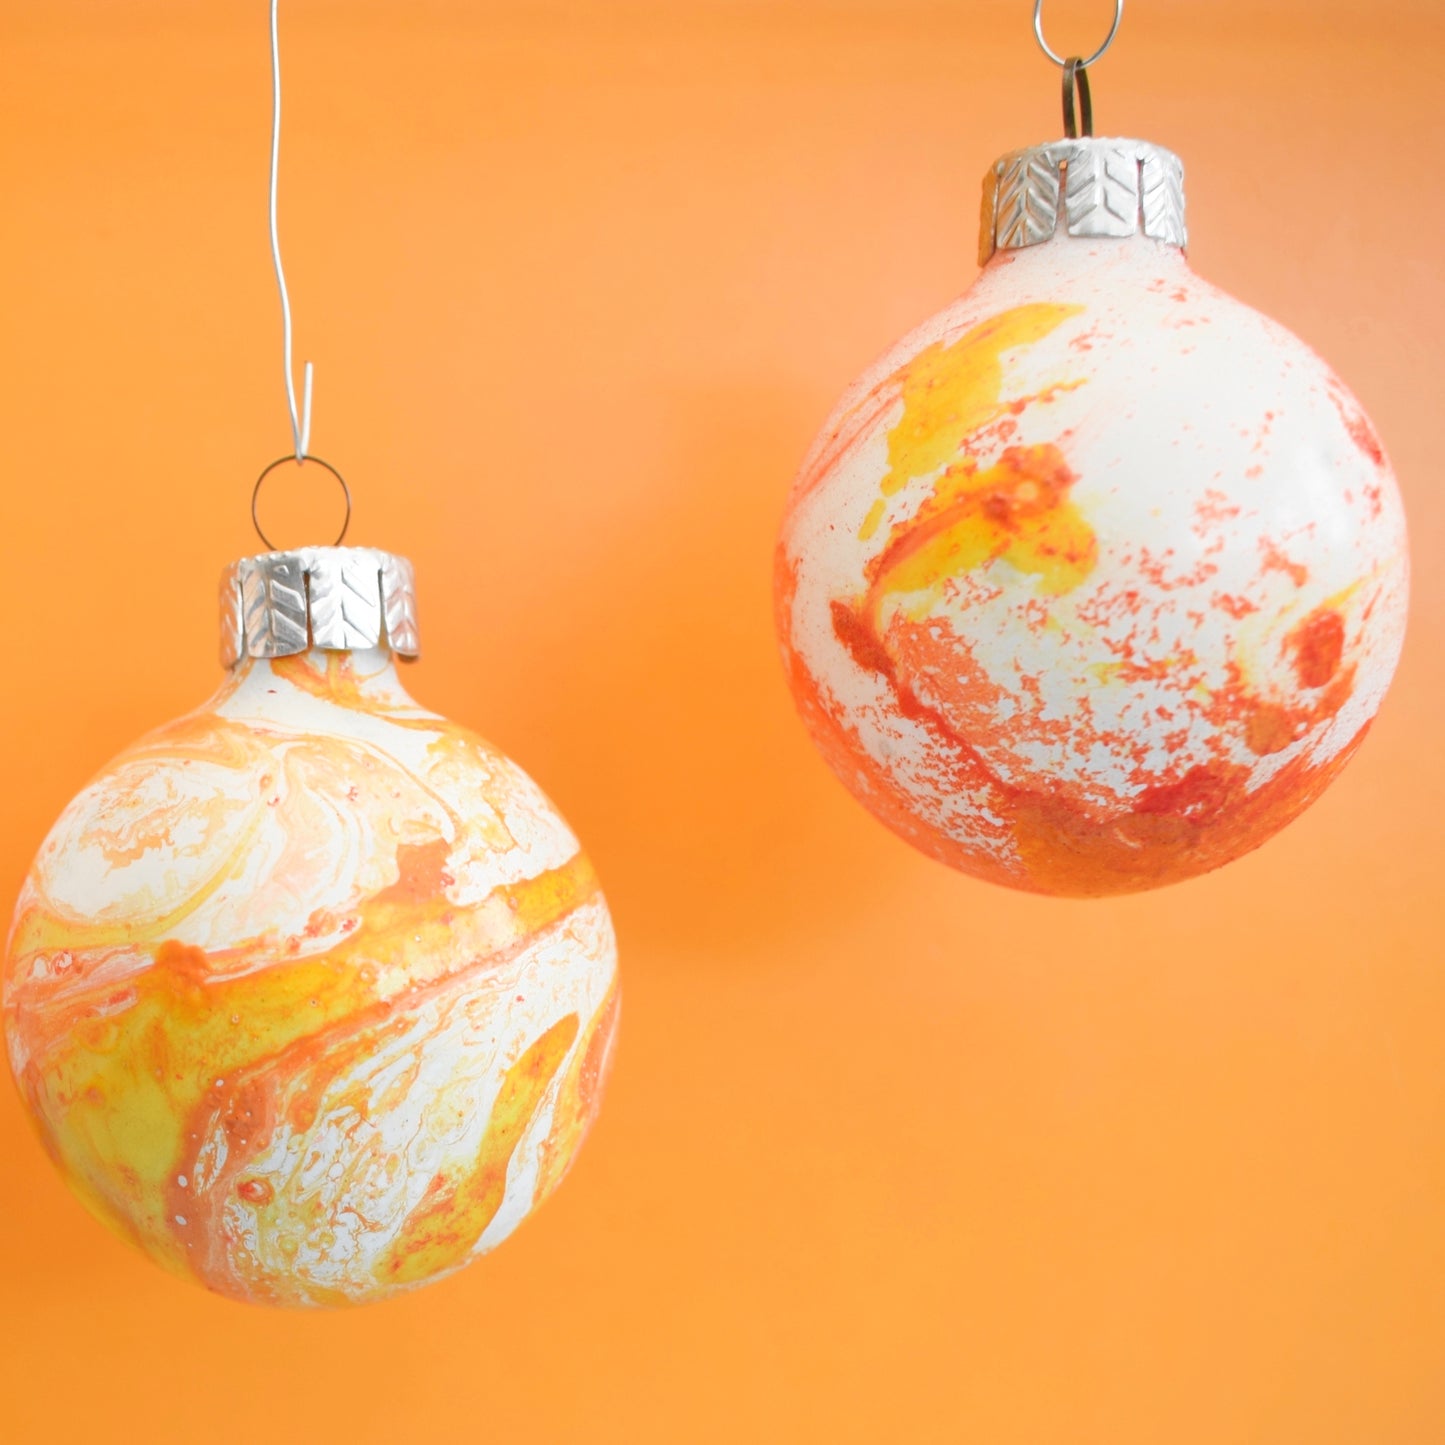 Vintage 1970s Glass Baubles - Hydro Dipped - Orange & Yellow